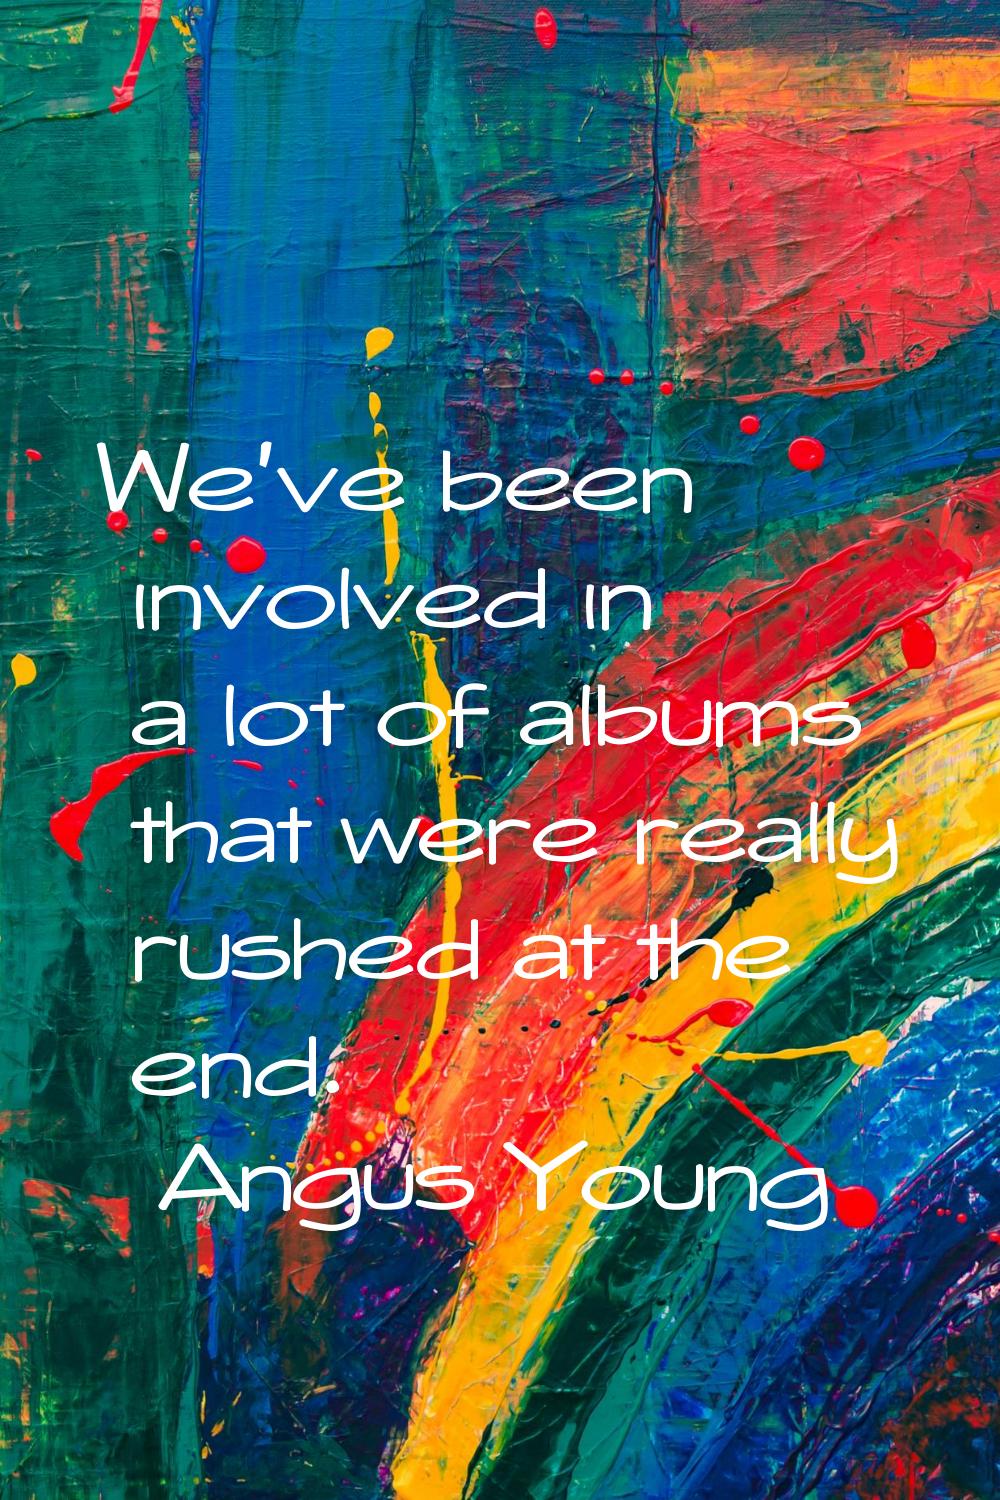 We've been involved in a lot of albums that were really rushed at the end.